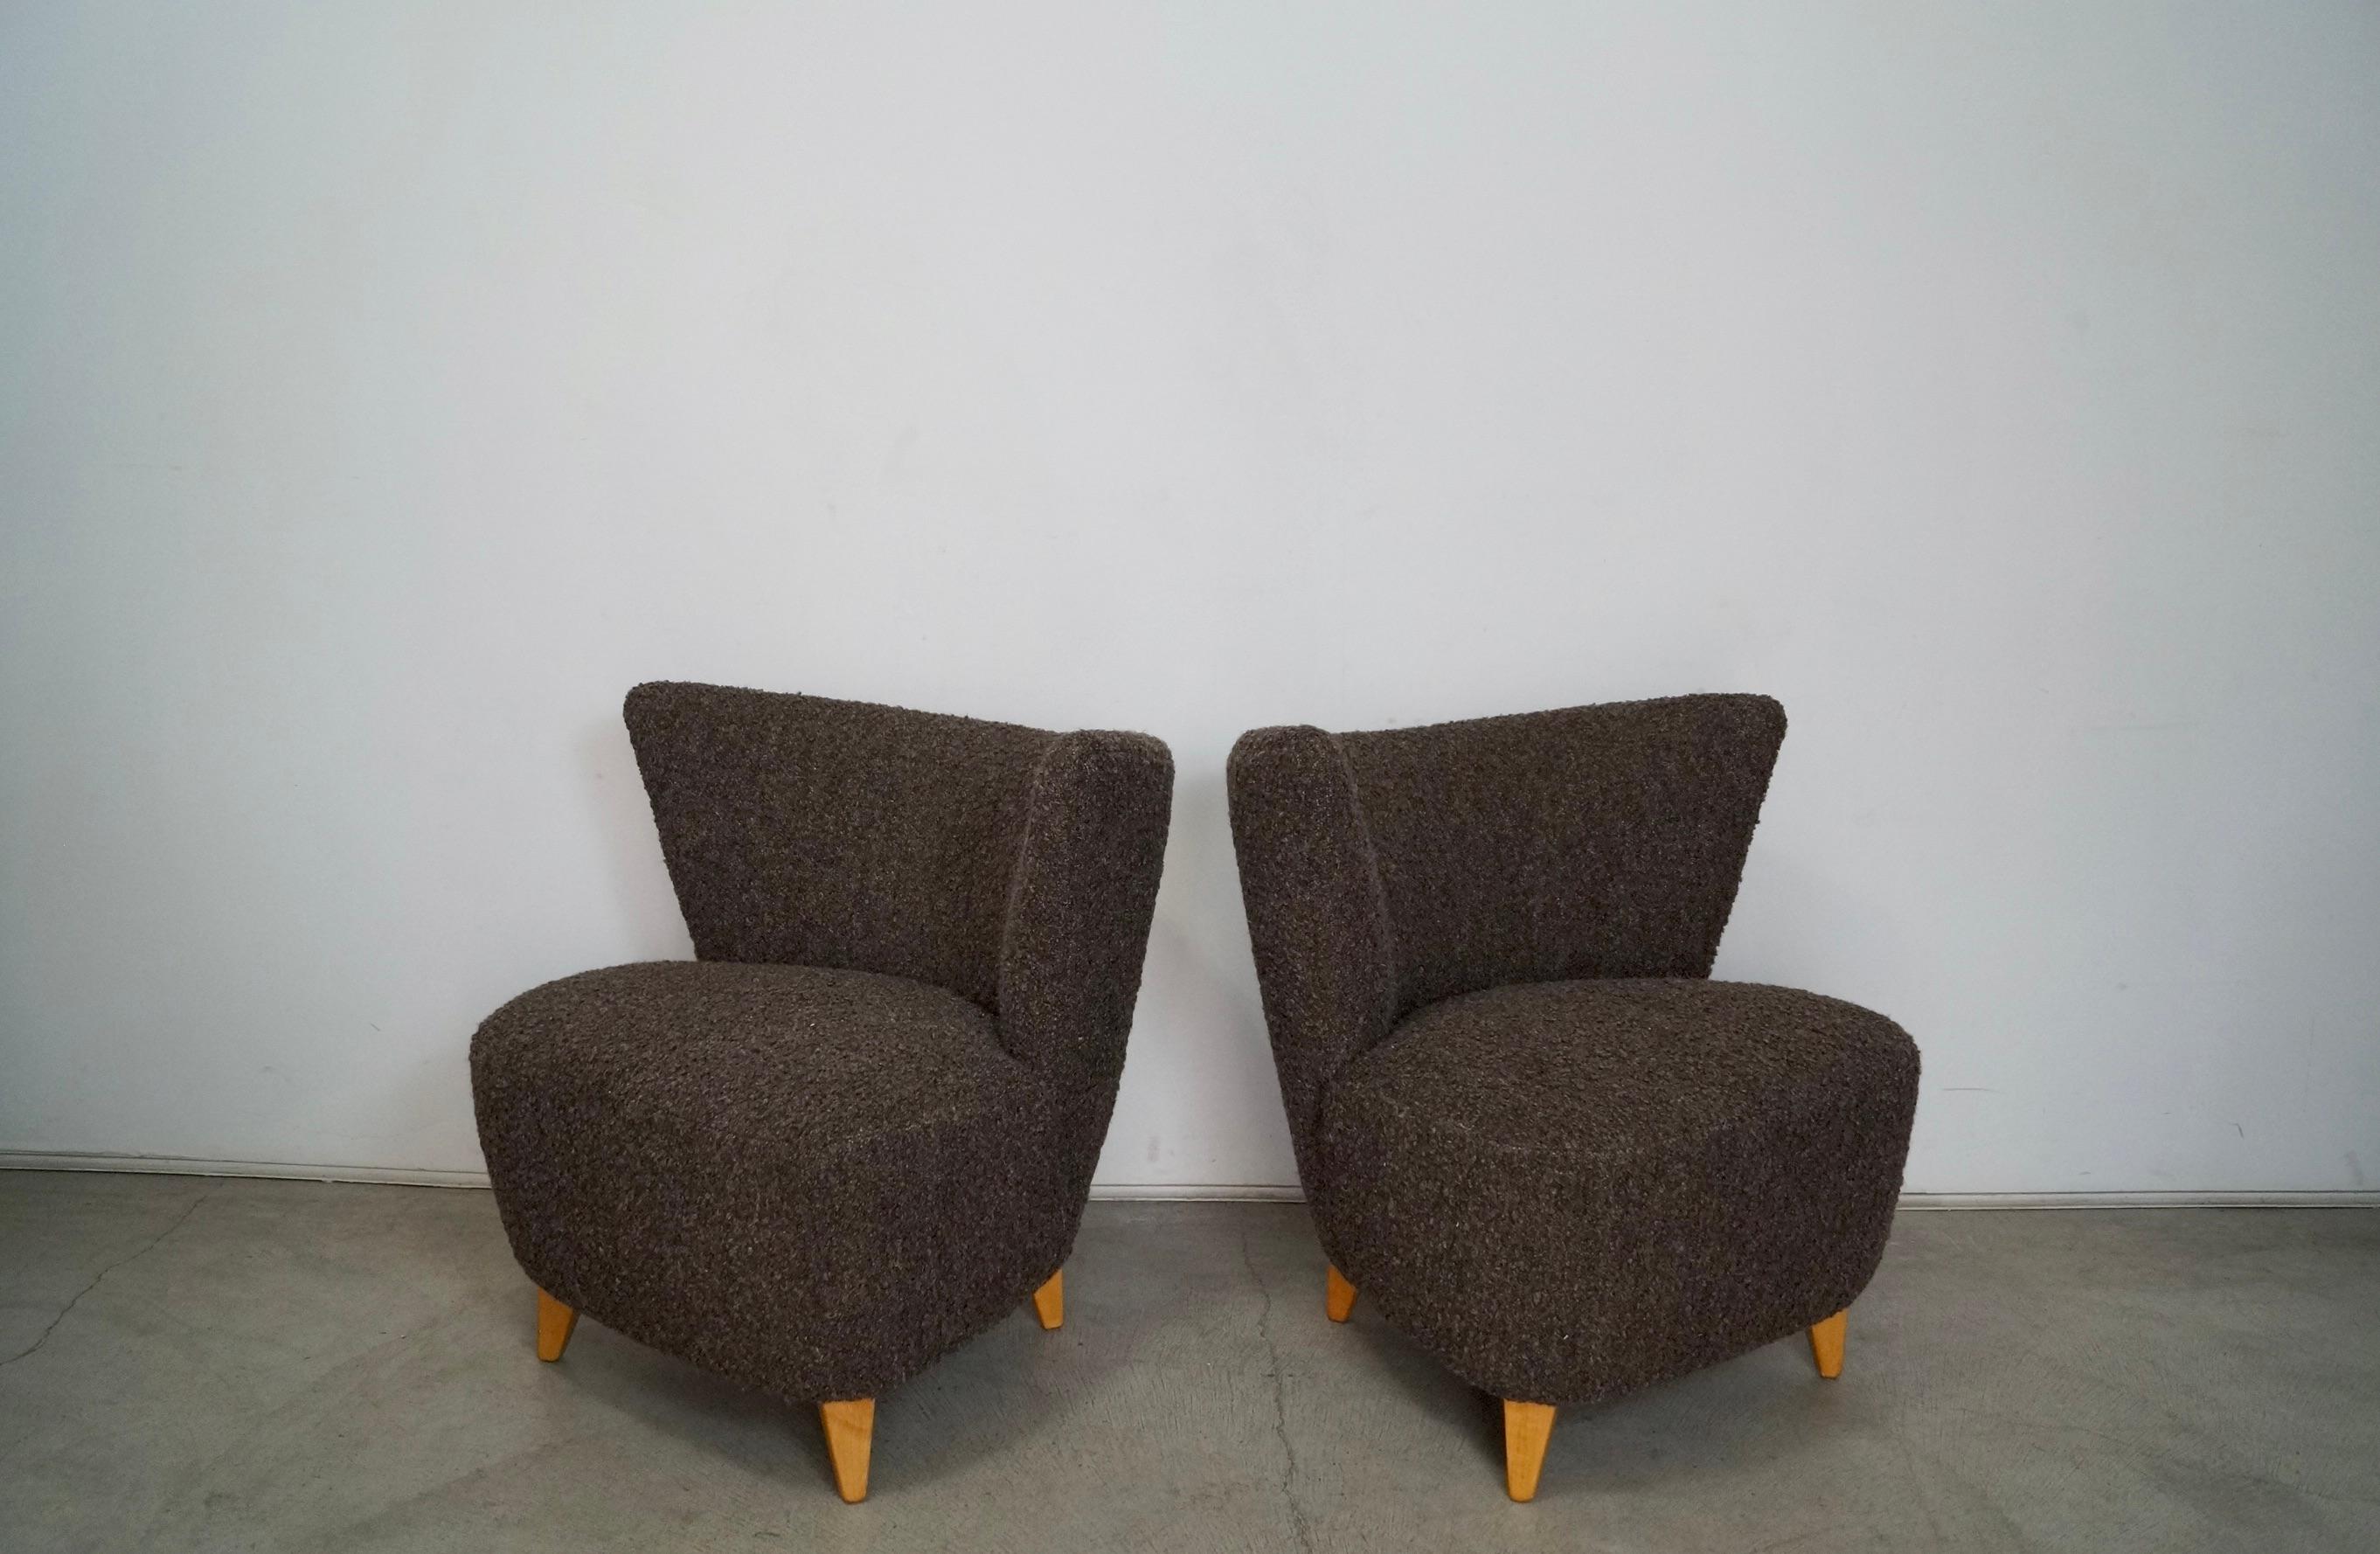 Pair of 1940's Art Deco Wingback Lounge Chairs Reupholstered in Belgic Wool In Excellent Condition For Sale In Burbank, CA